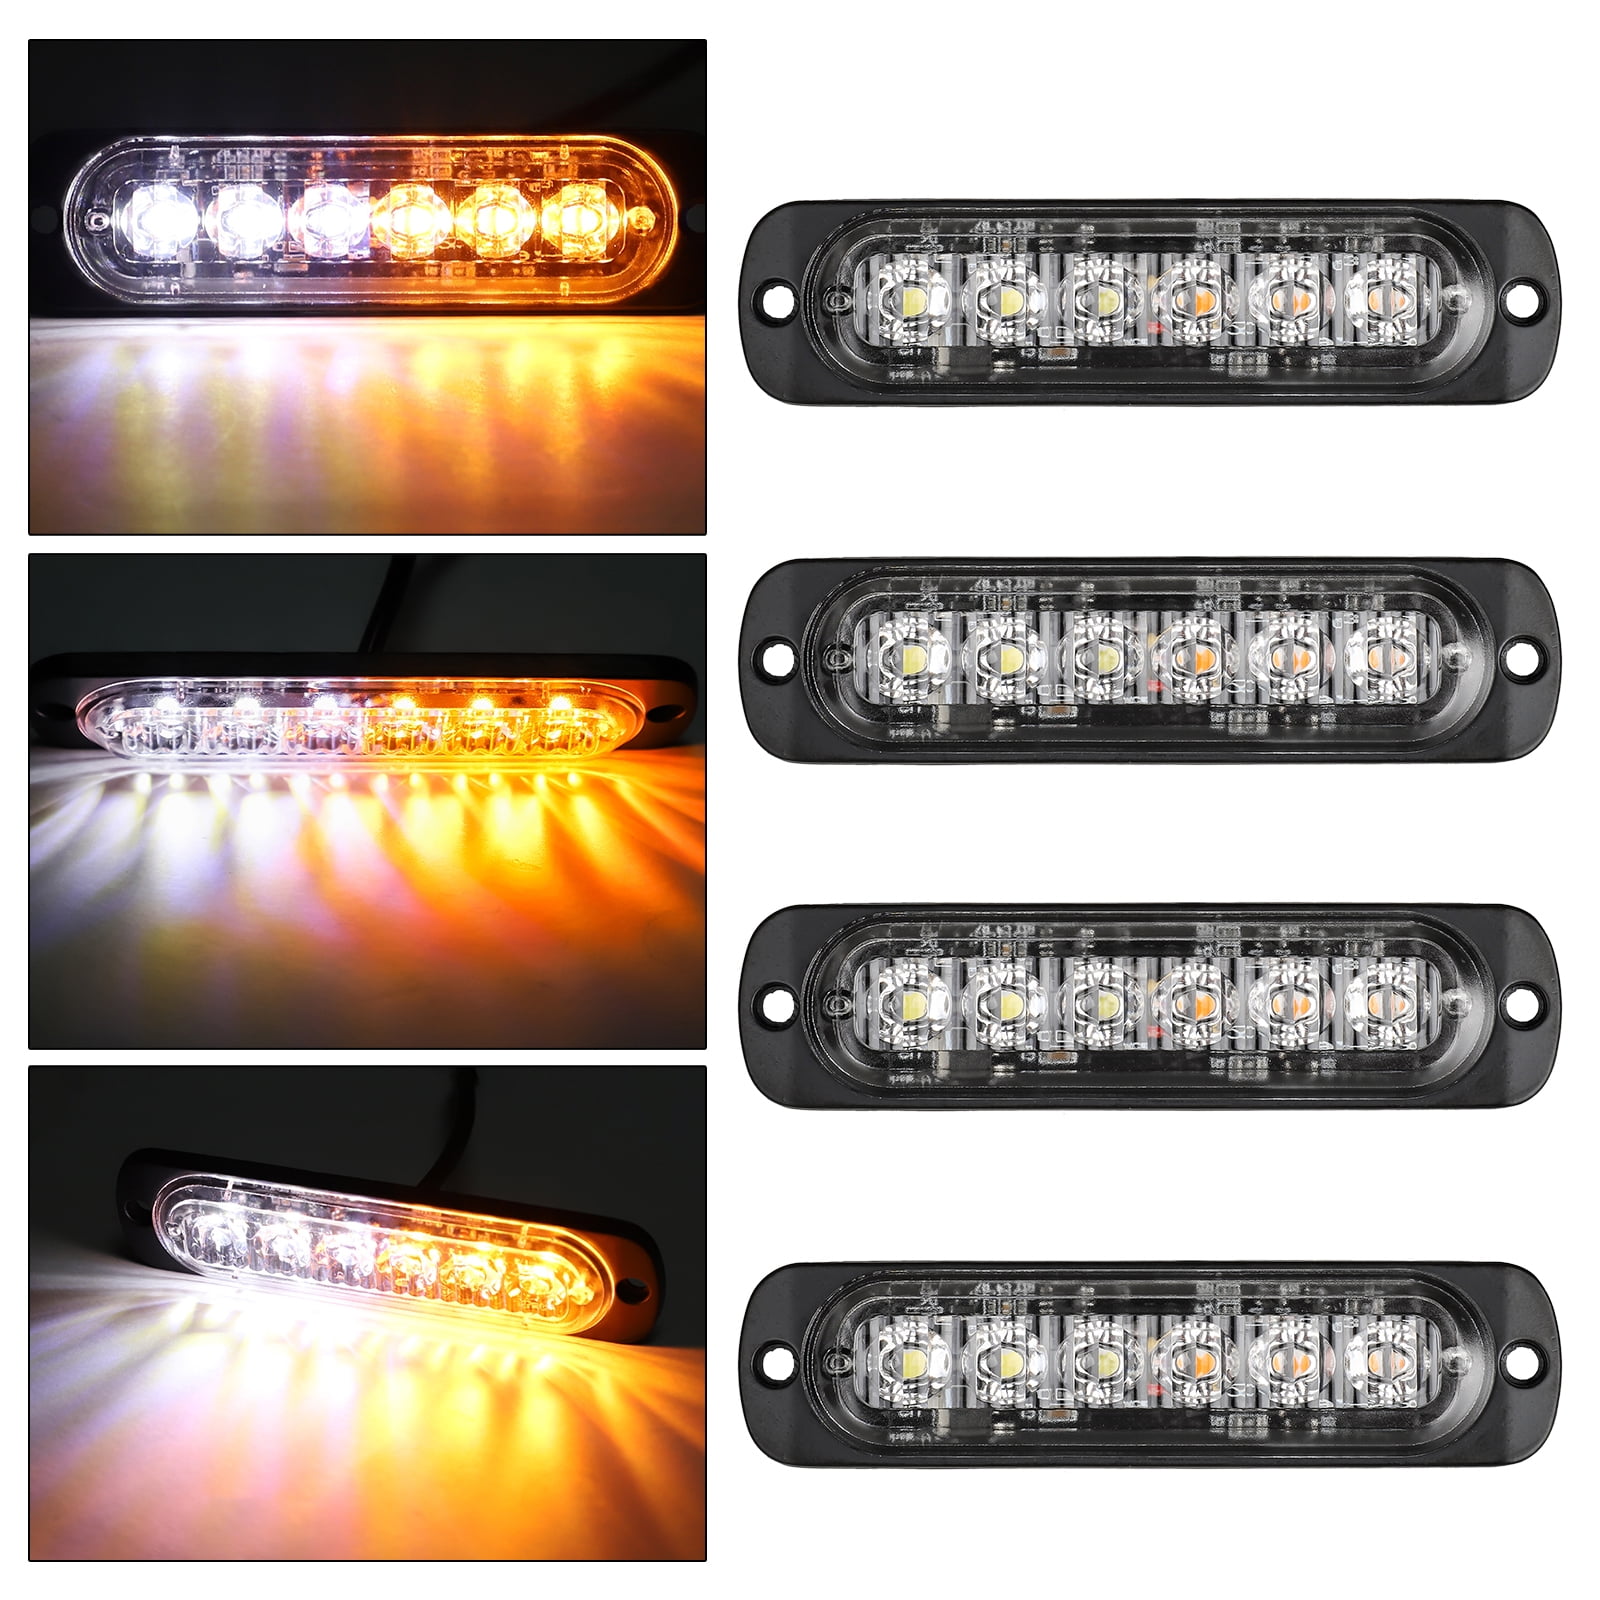 4pcs Emergency Warning Caution Hazard Construction Ultra Slim Sync Feature Car Truck with Main Control Box Surface Mount White Red Led Warning Lights 